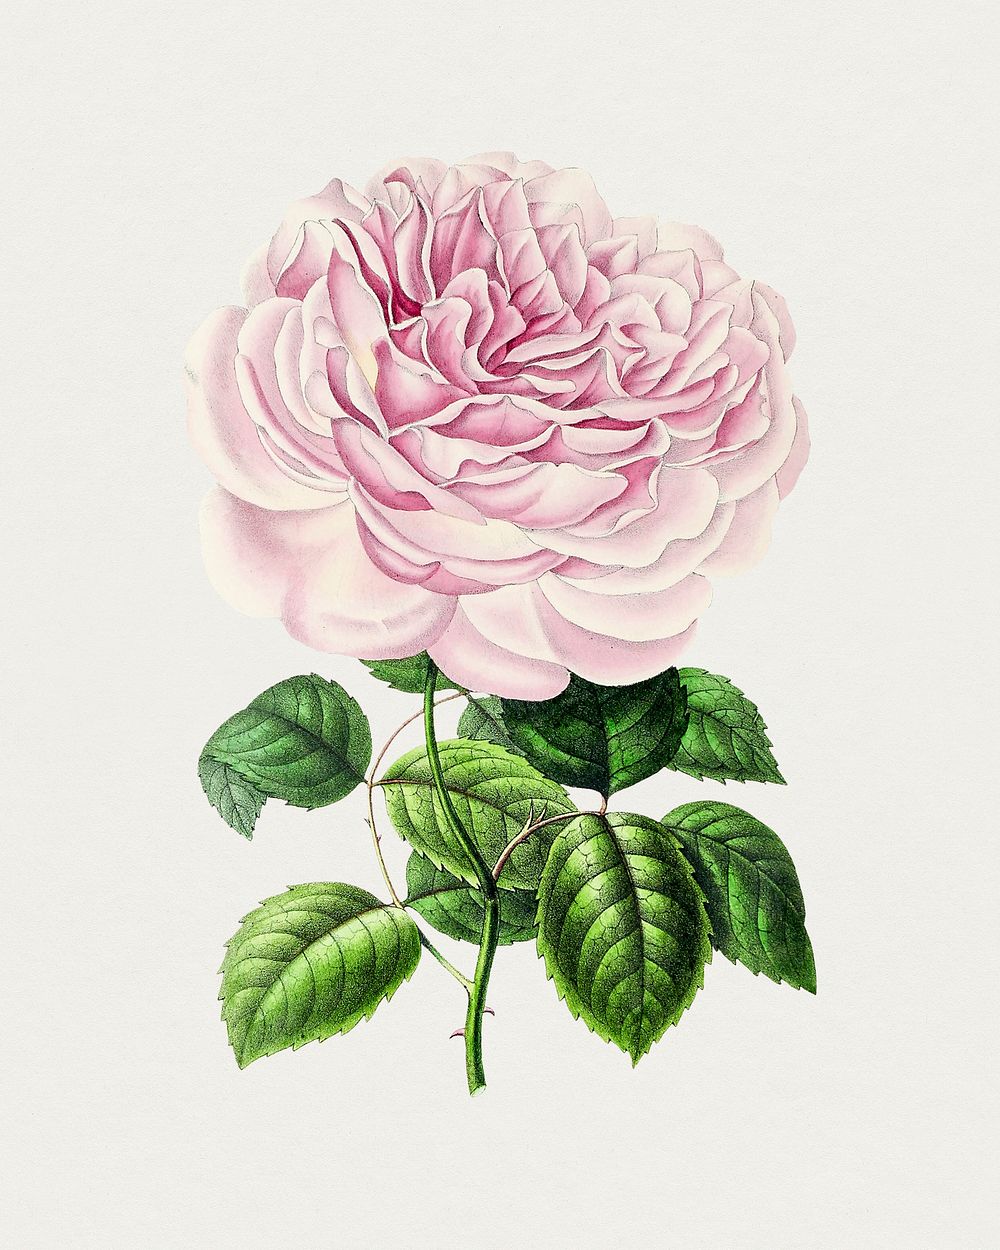 Hand drawn Bengal rose. Original from Biodiversity Heritage Library. Digitally enhanced by rawpixel.